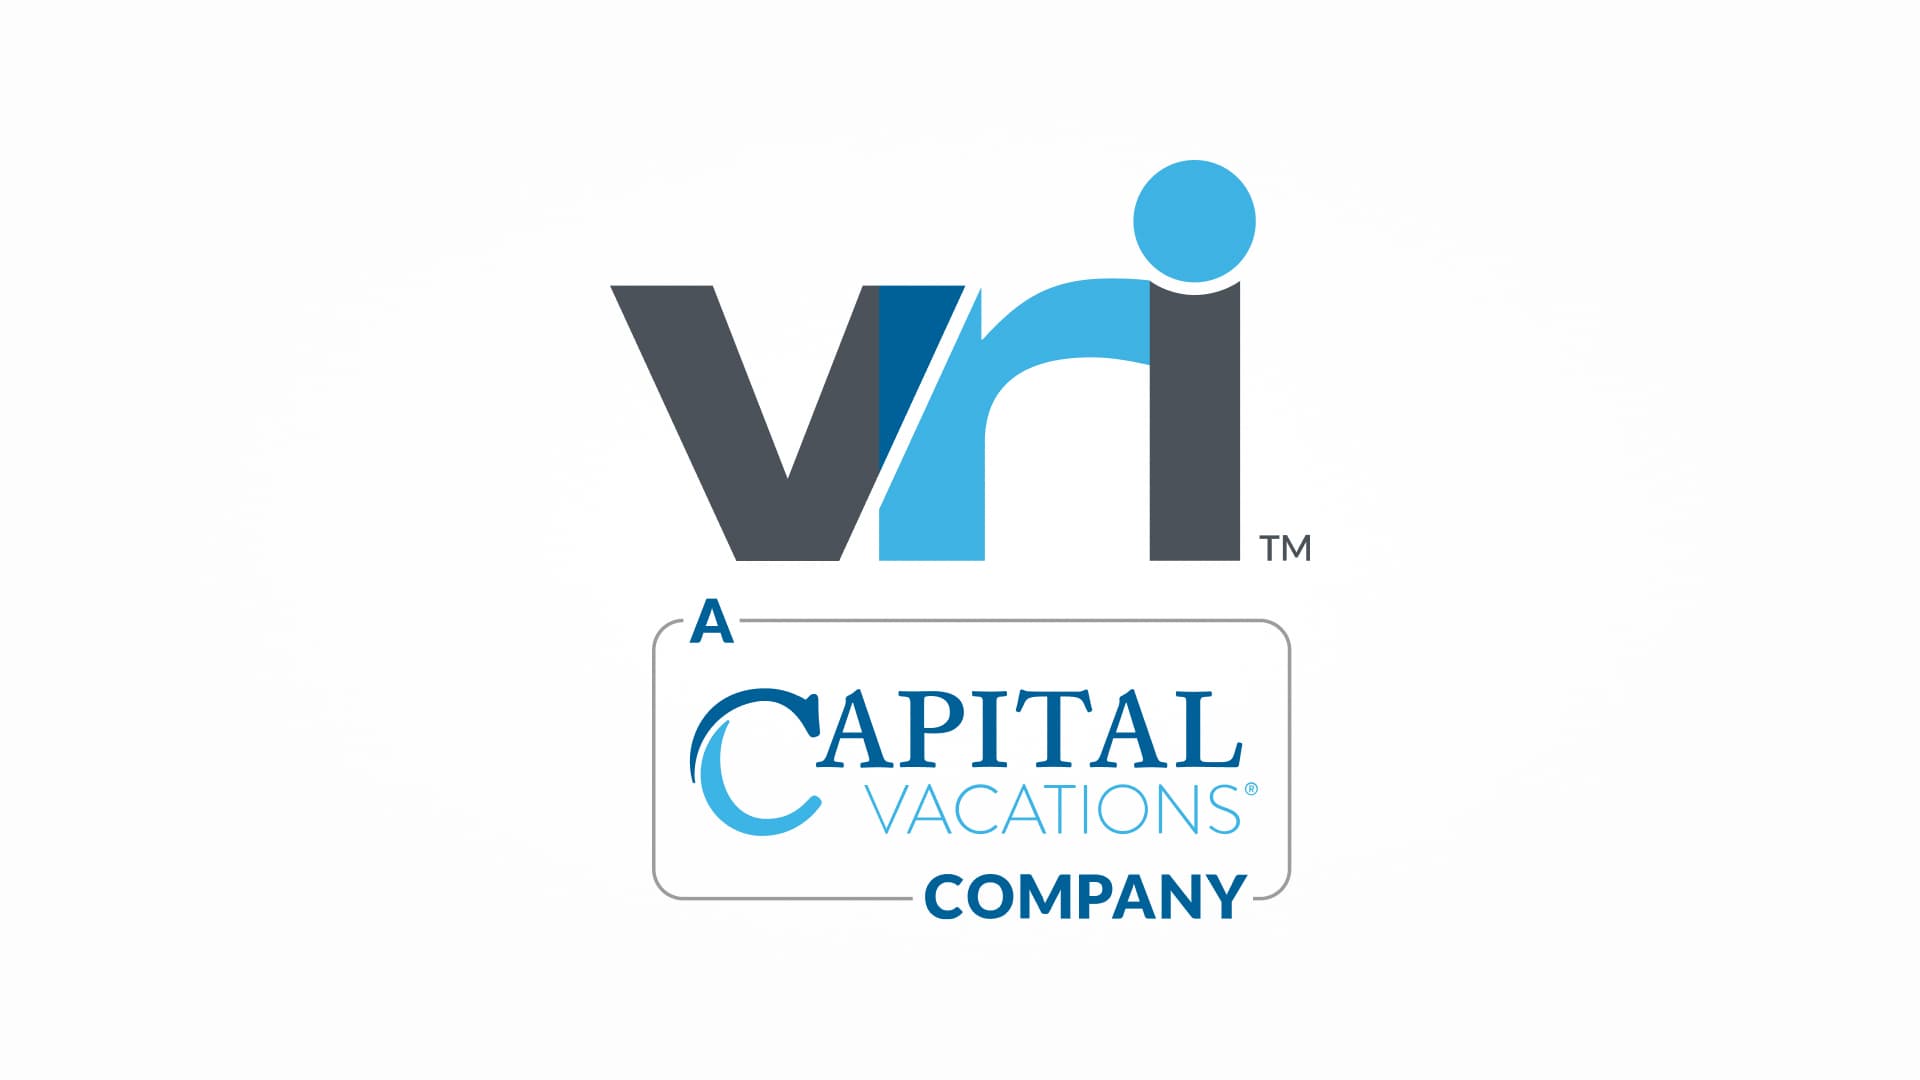 Capital Vacations, LLC. acquires VRI Americas from Marriott Vacations Worldwide